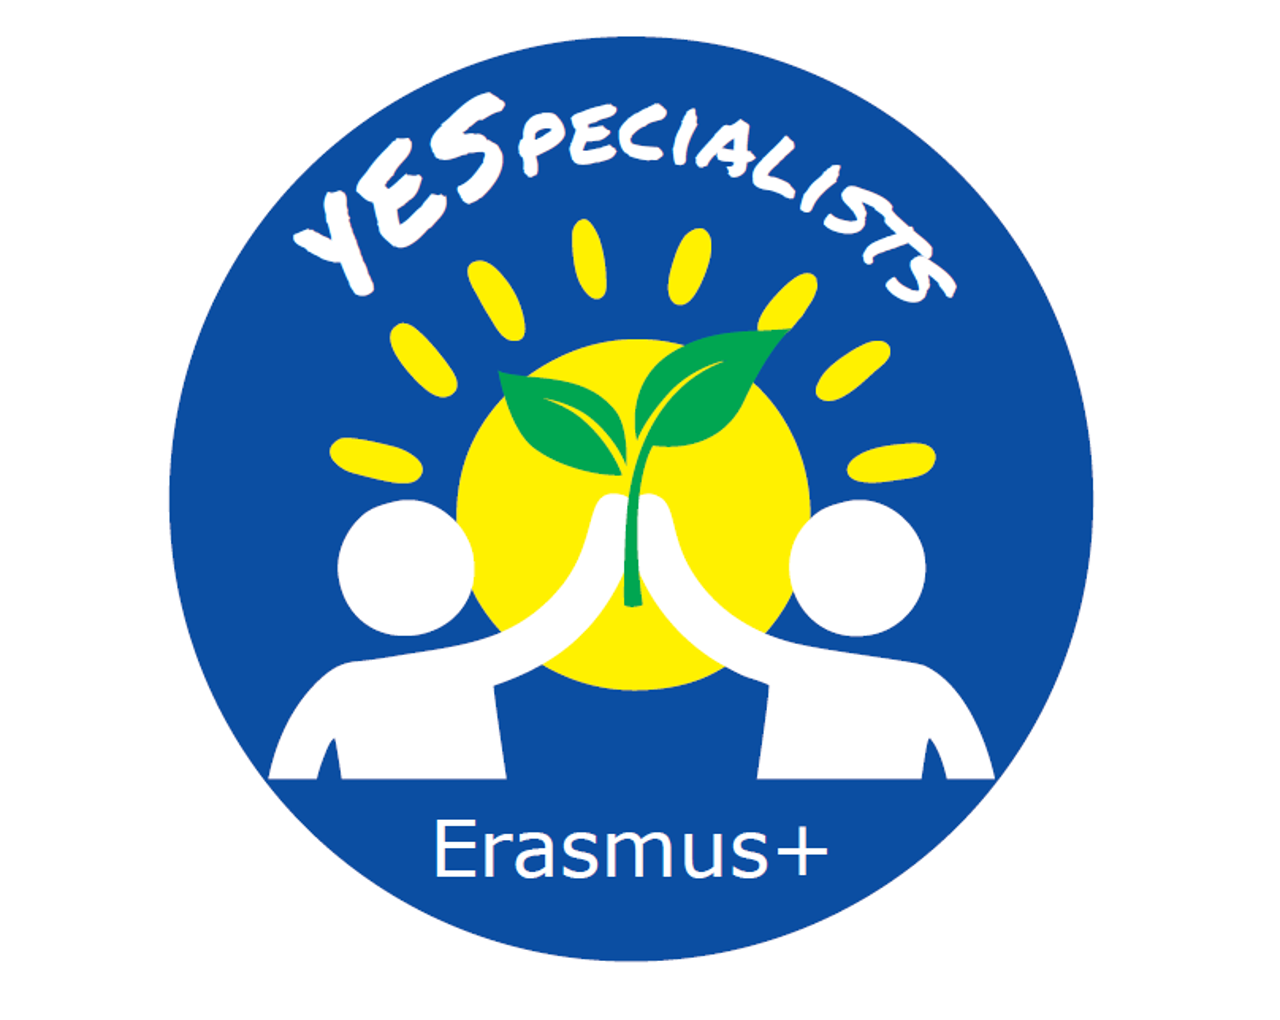 YESspecialists